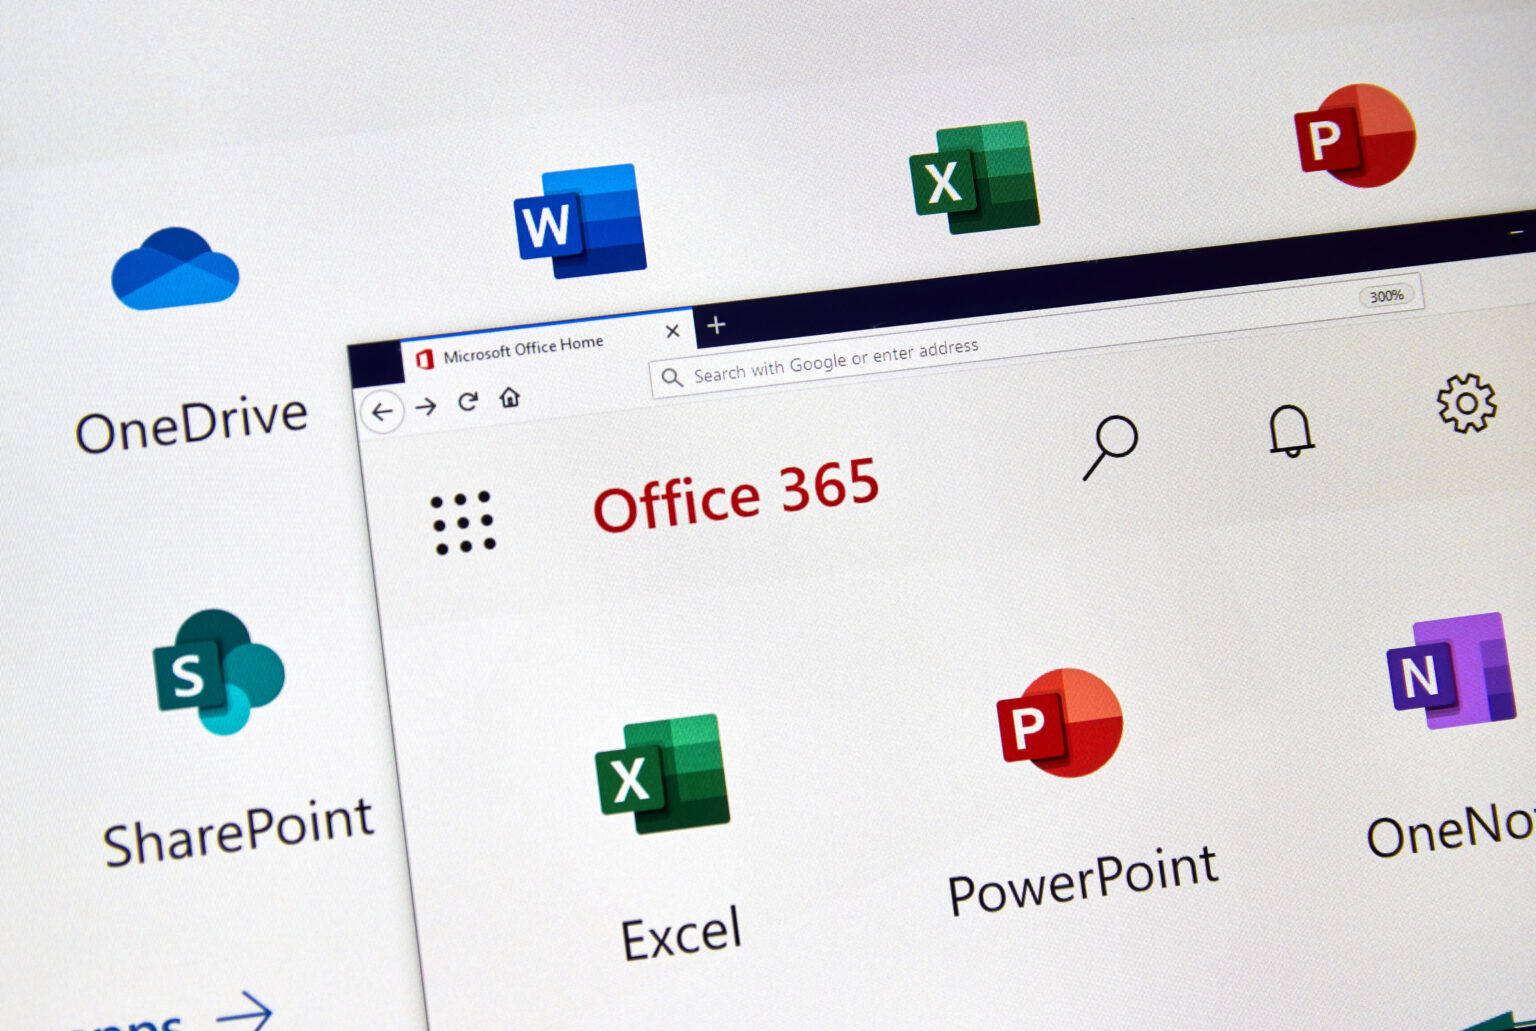 Microsoft Office 365 new icons displayed.